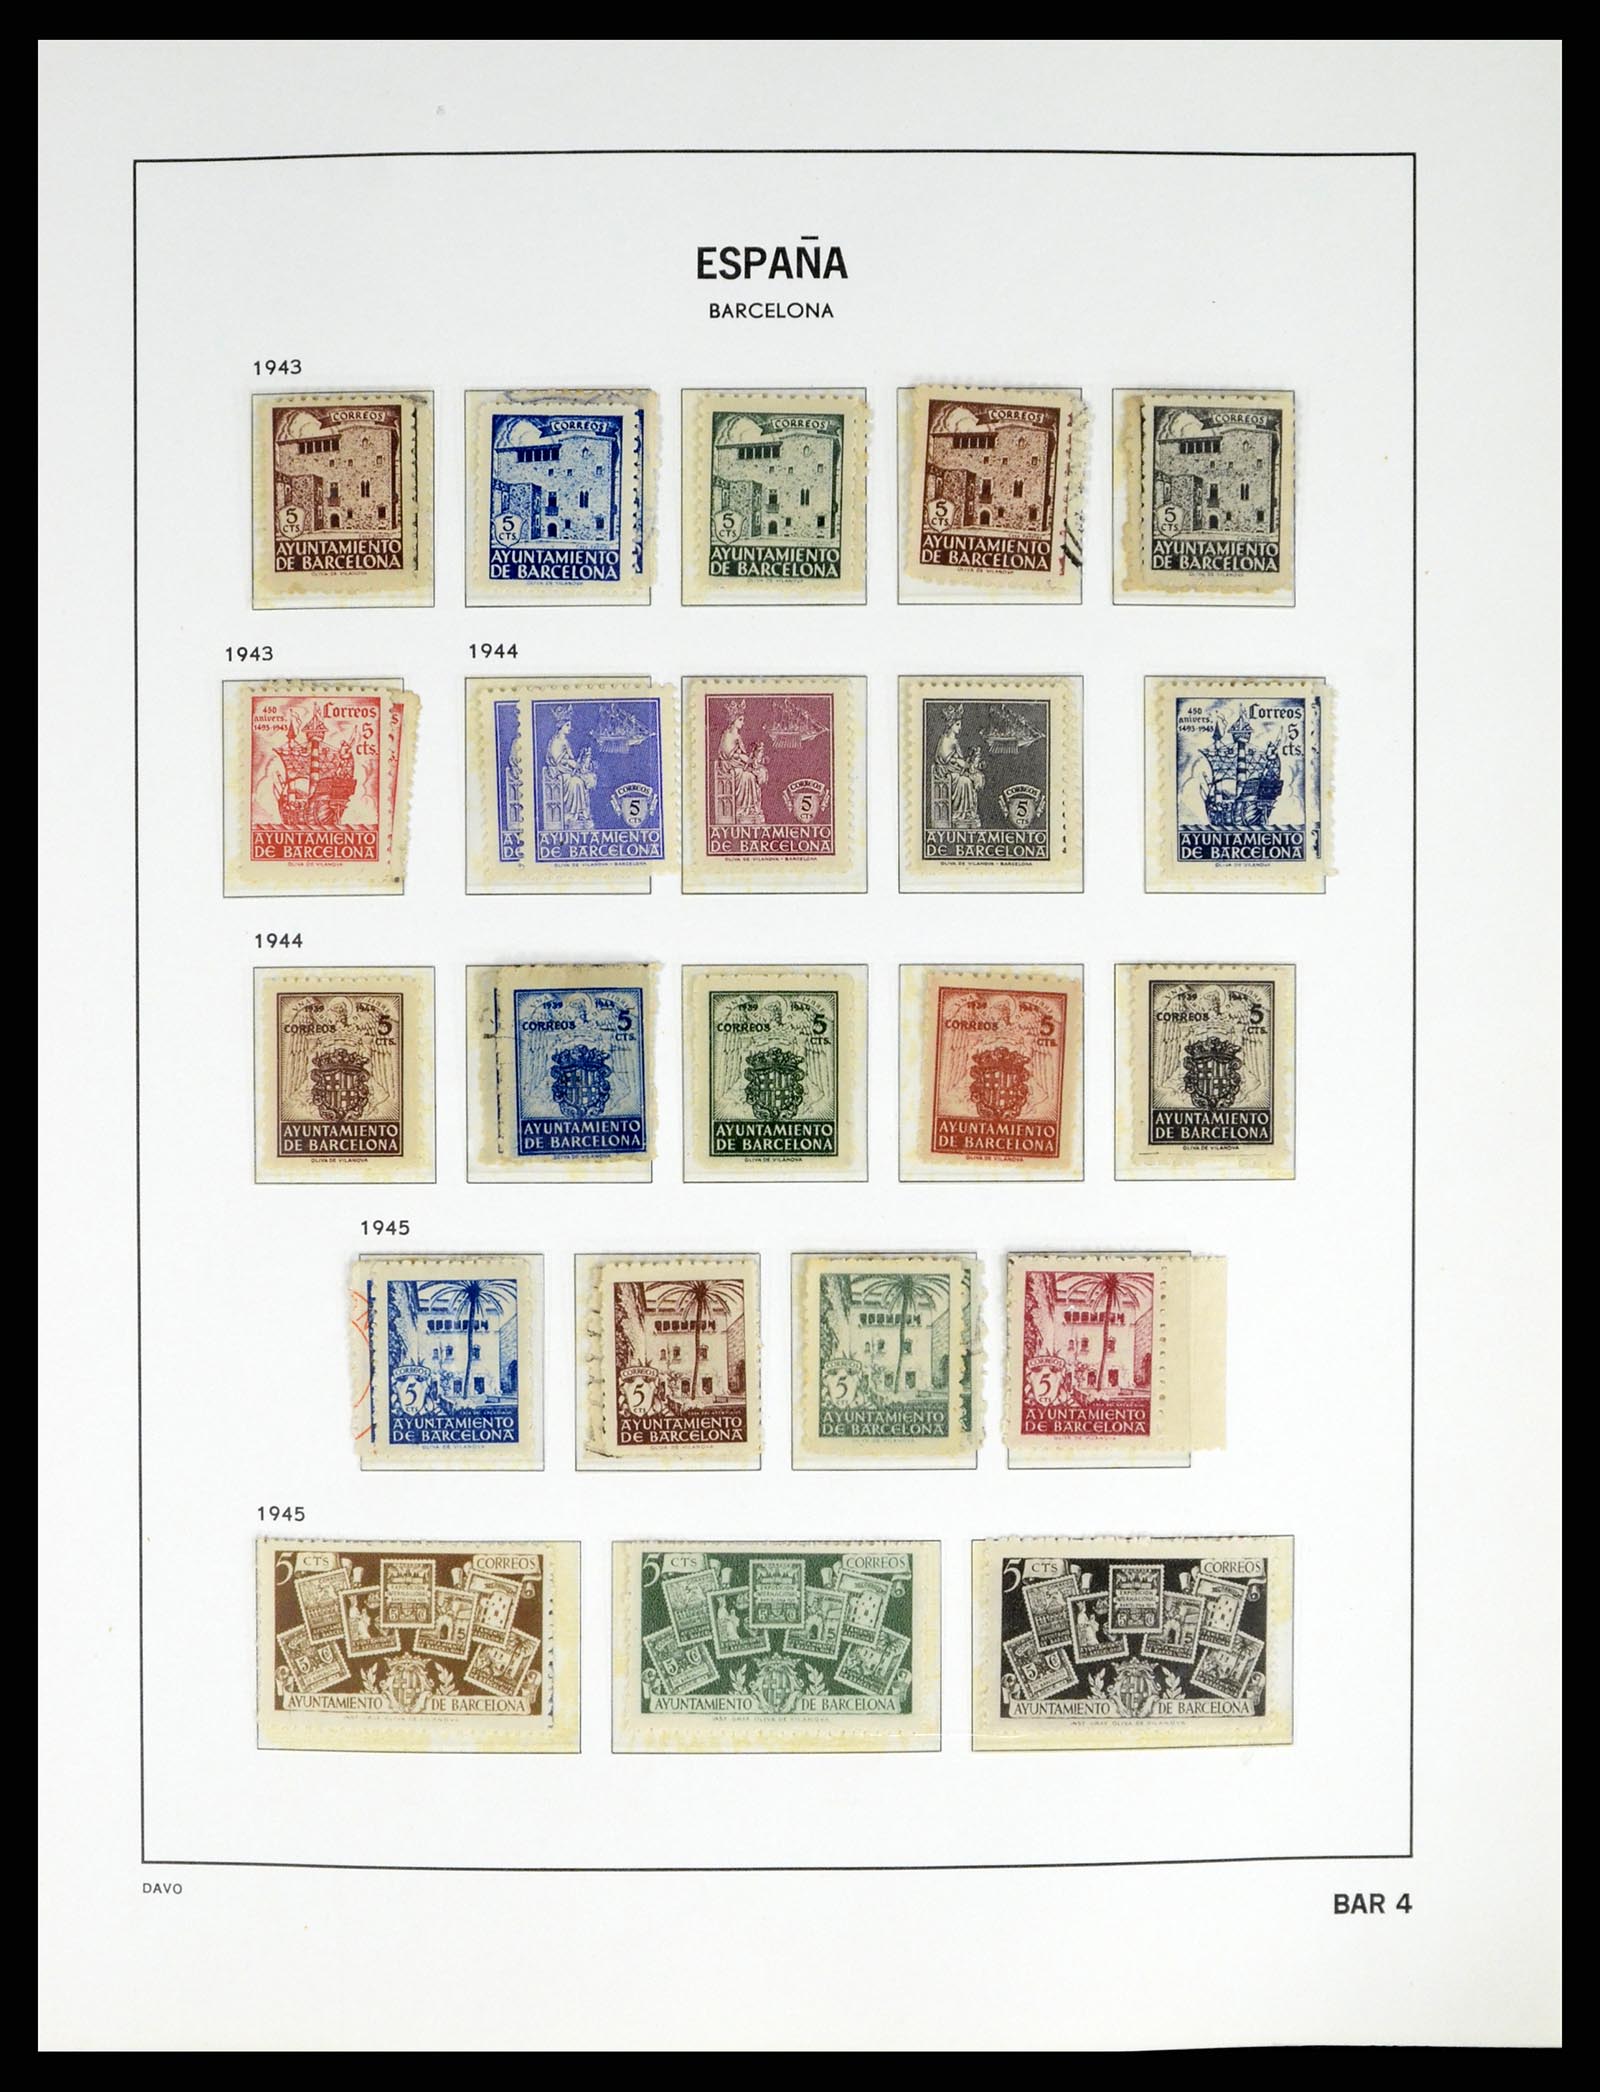 37837 017 - Stamp Collection 37837 Spansish civil war and local post 1893-1945.